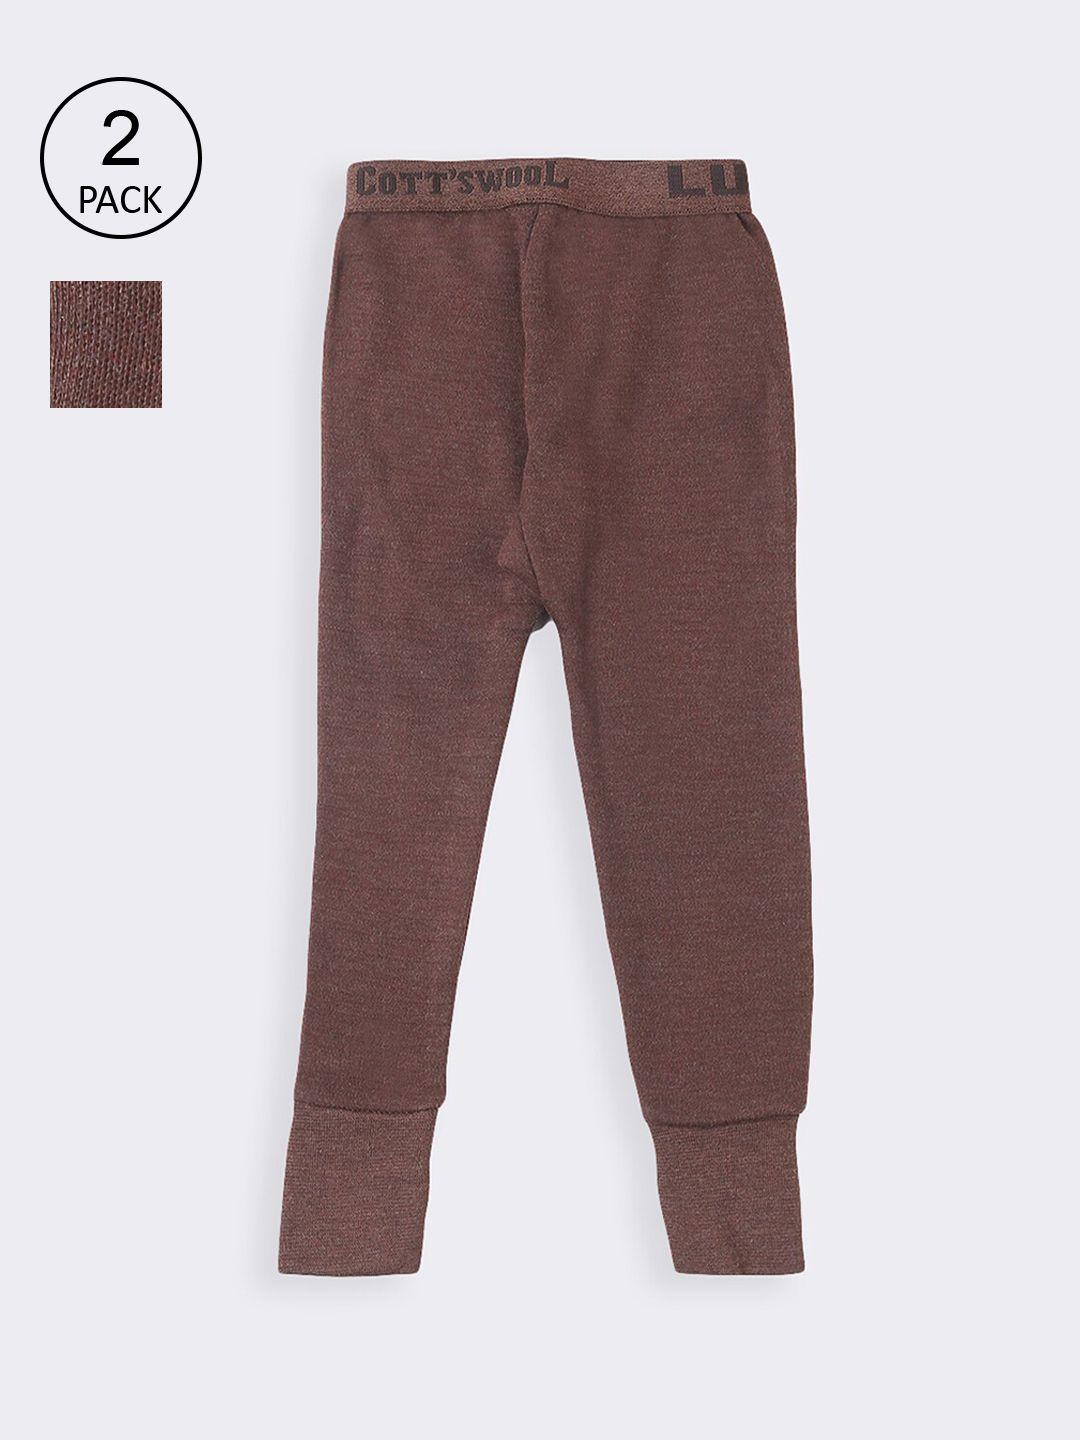 lux cottswool boys pack of 2 brown solid cotton thermal bottoms